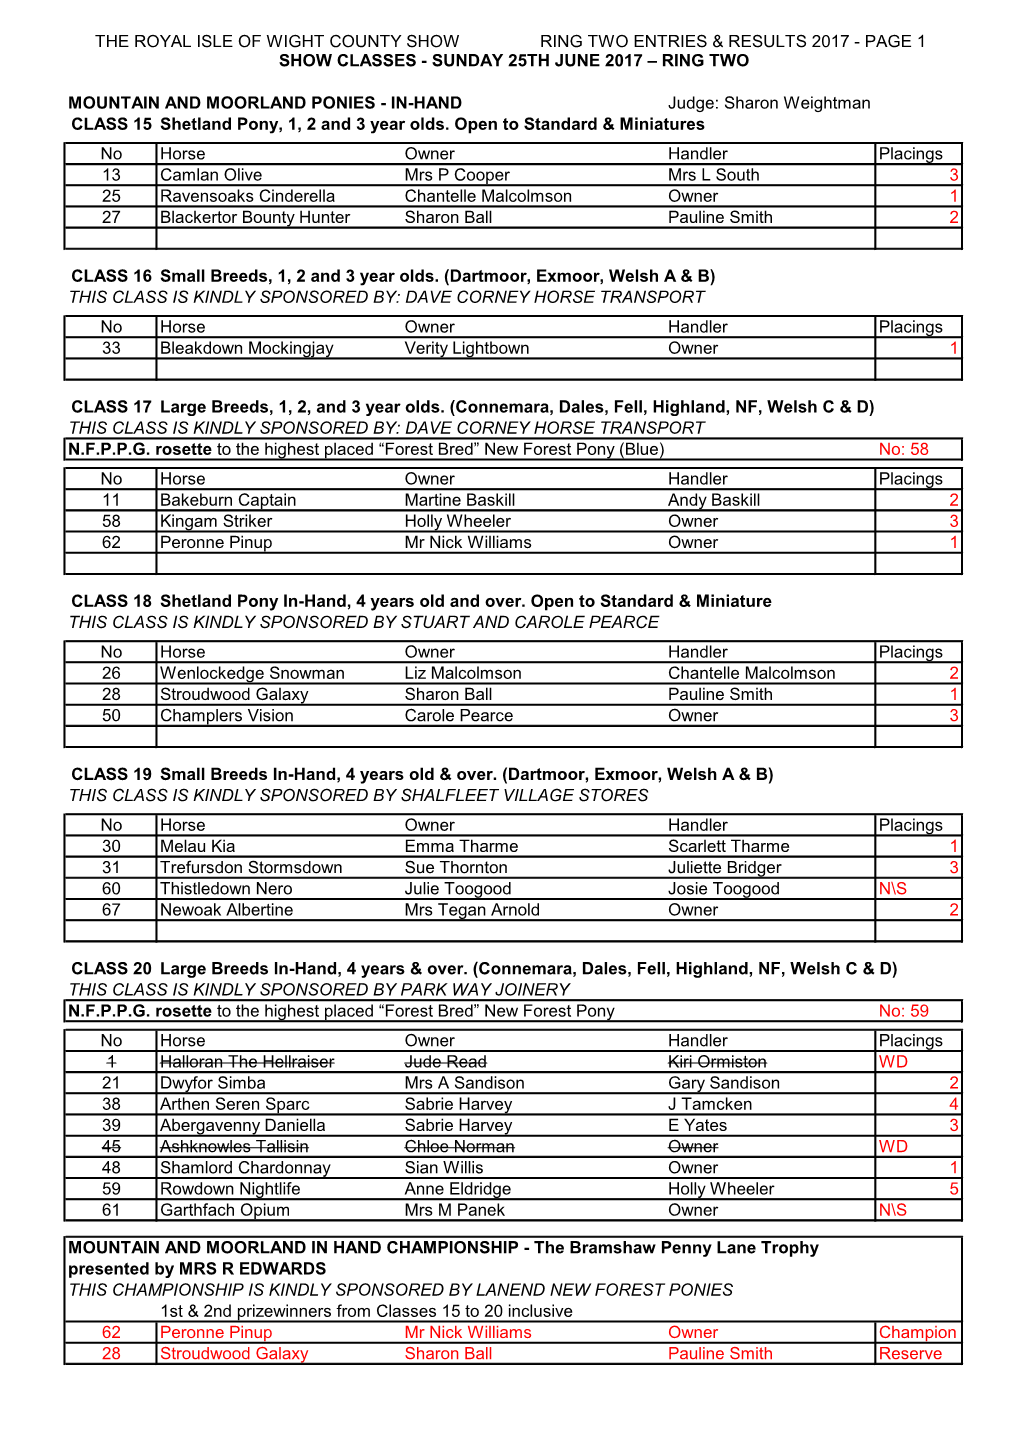 The Royal Isle of Wight County Show Ring Two Entries & Results 2017 - Page 1 Show Classes - Sunday 25Th June 2017 – Ring Two